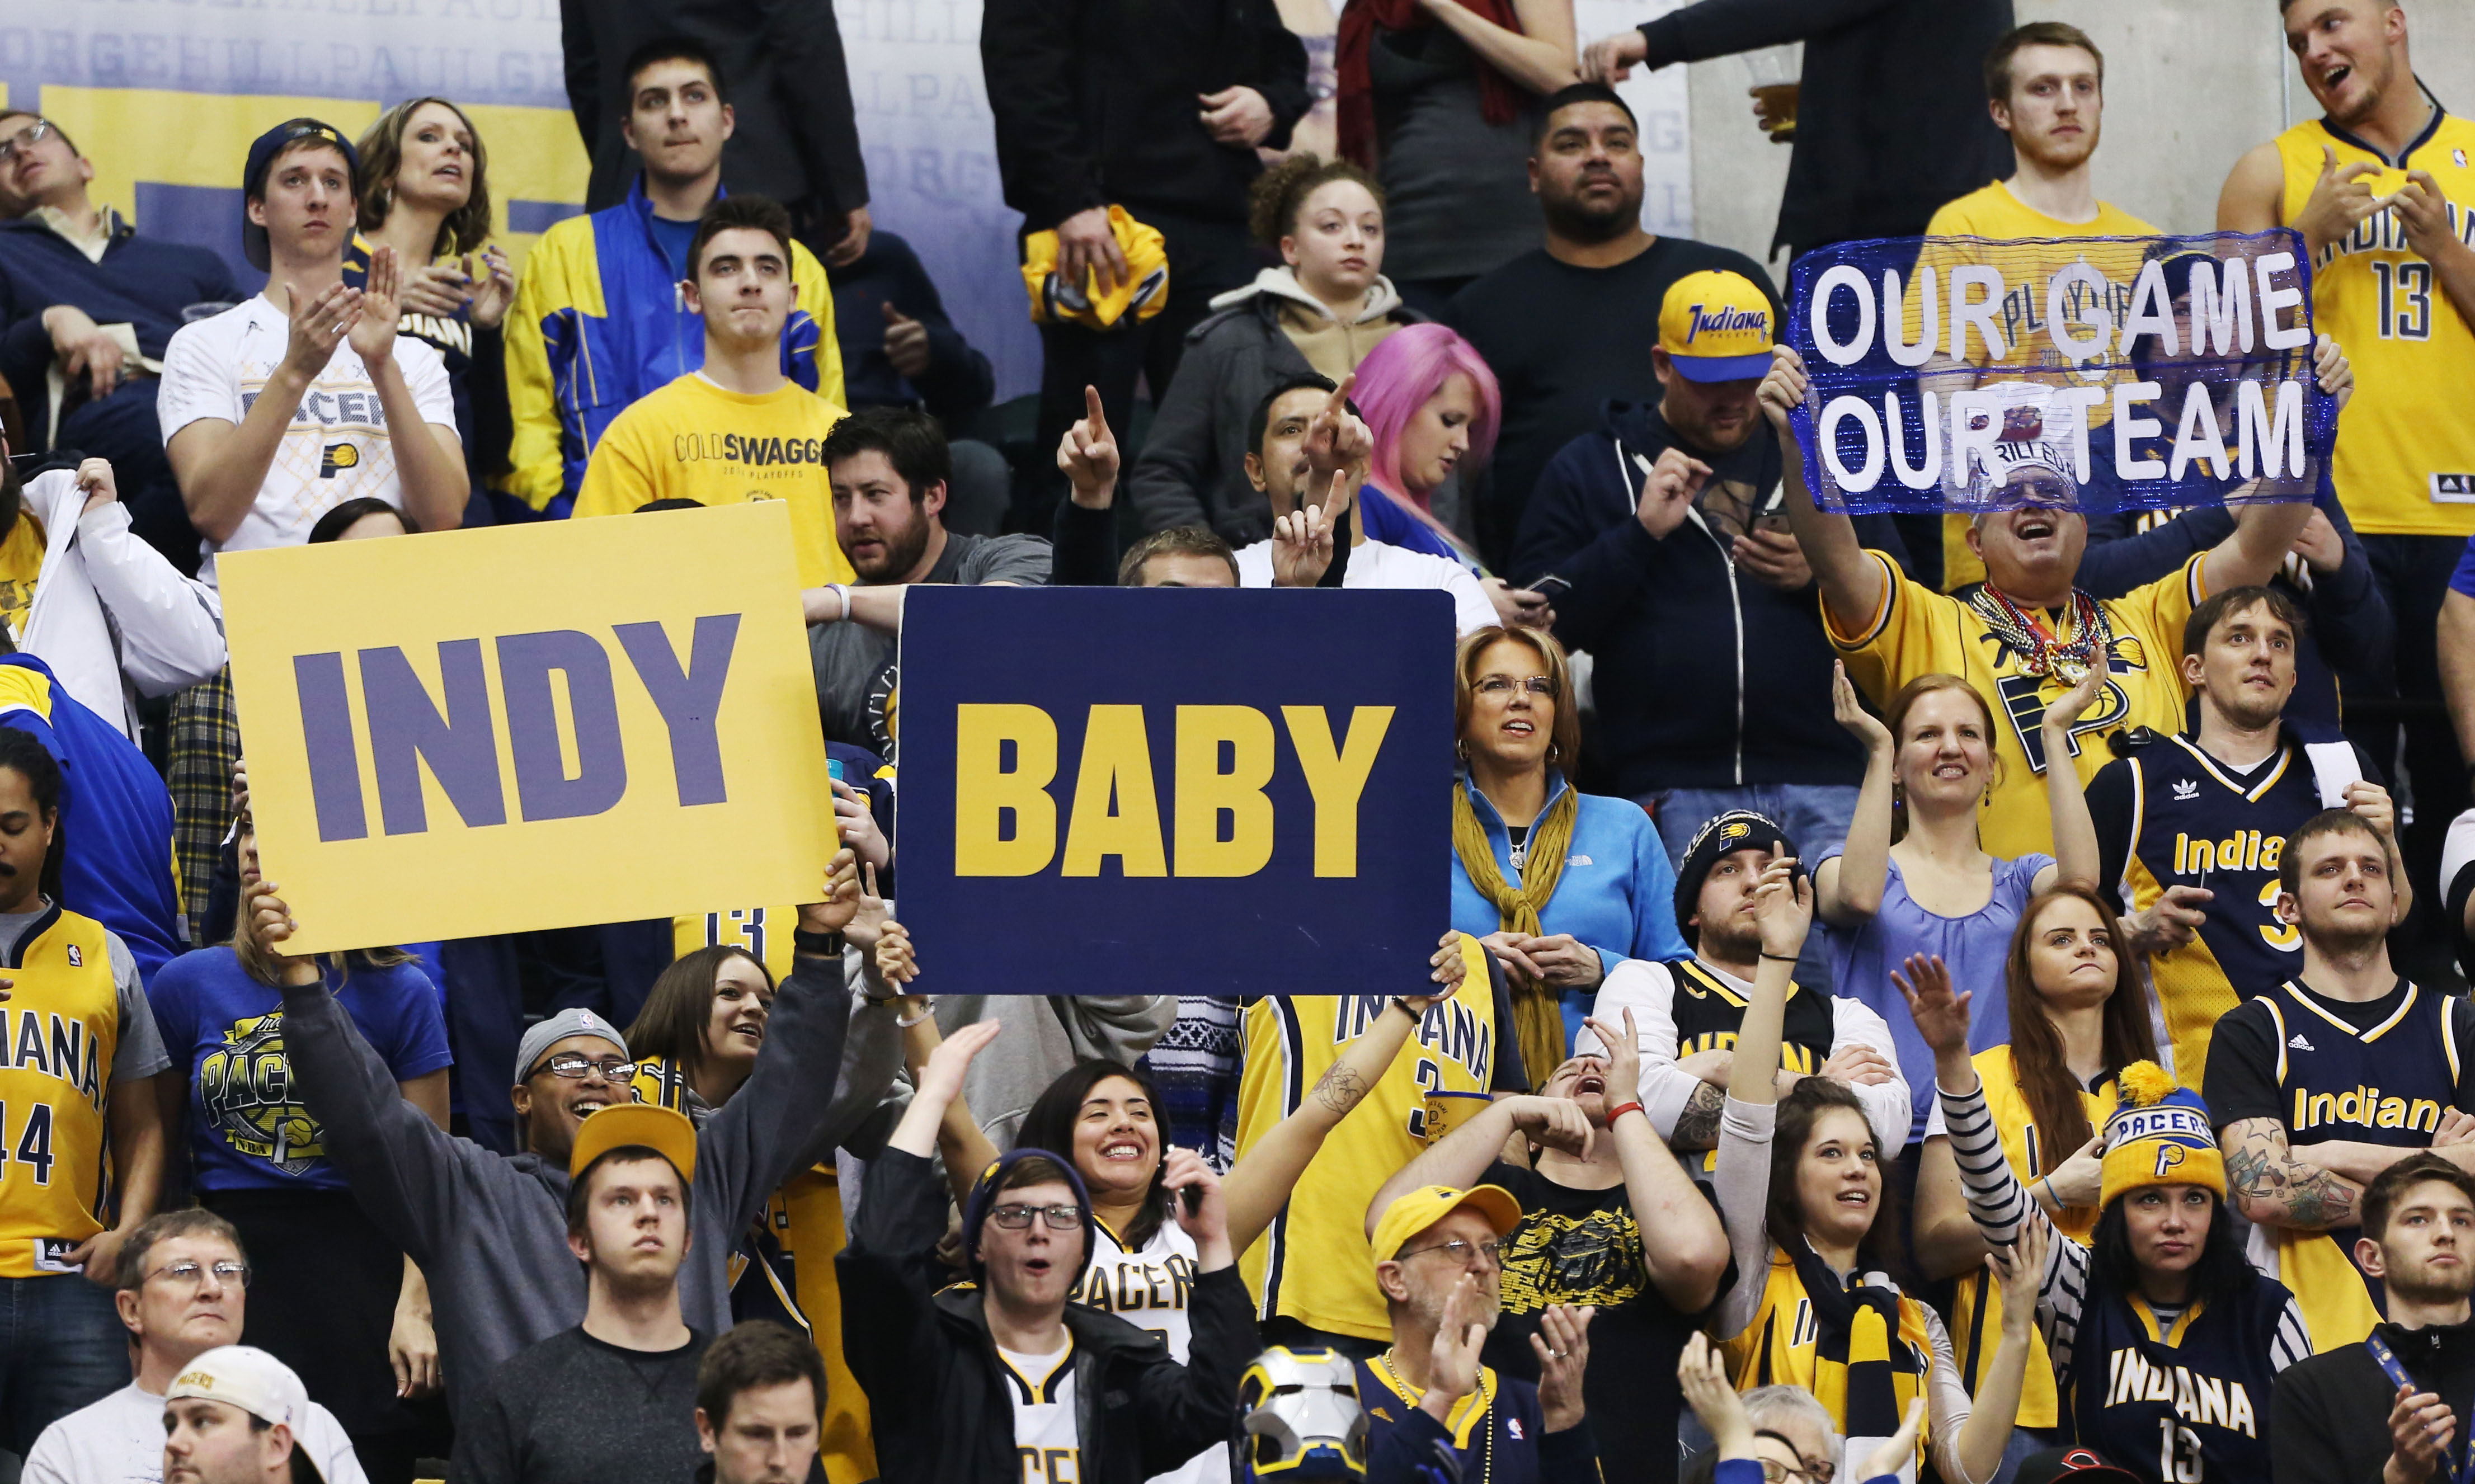 Mar 6, 2015; Indianapolis, IN, USA; Indiana Pacers fans celebrate the Pacers' victory during a game against the Chicago Bulls at Bankers Life Fieldhouse. Indiana defeats Chicago 98-84. (Brian Spurlock-USA TODAY Sports)